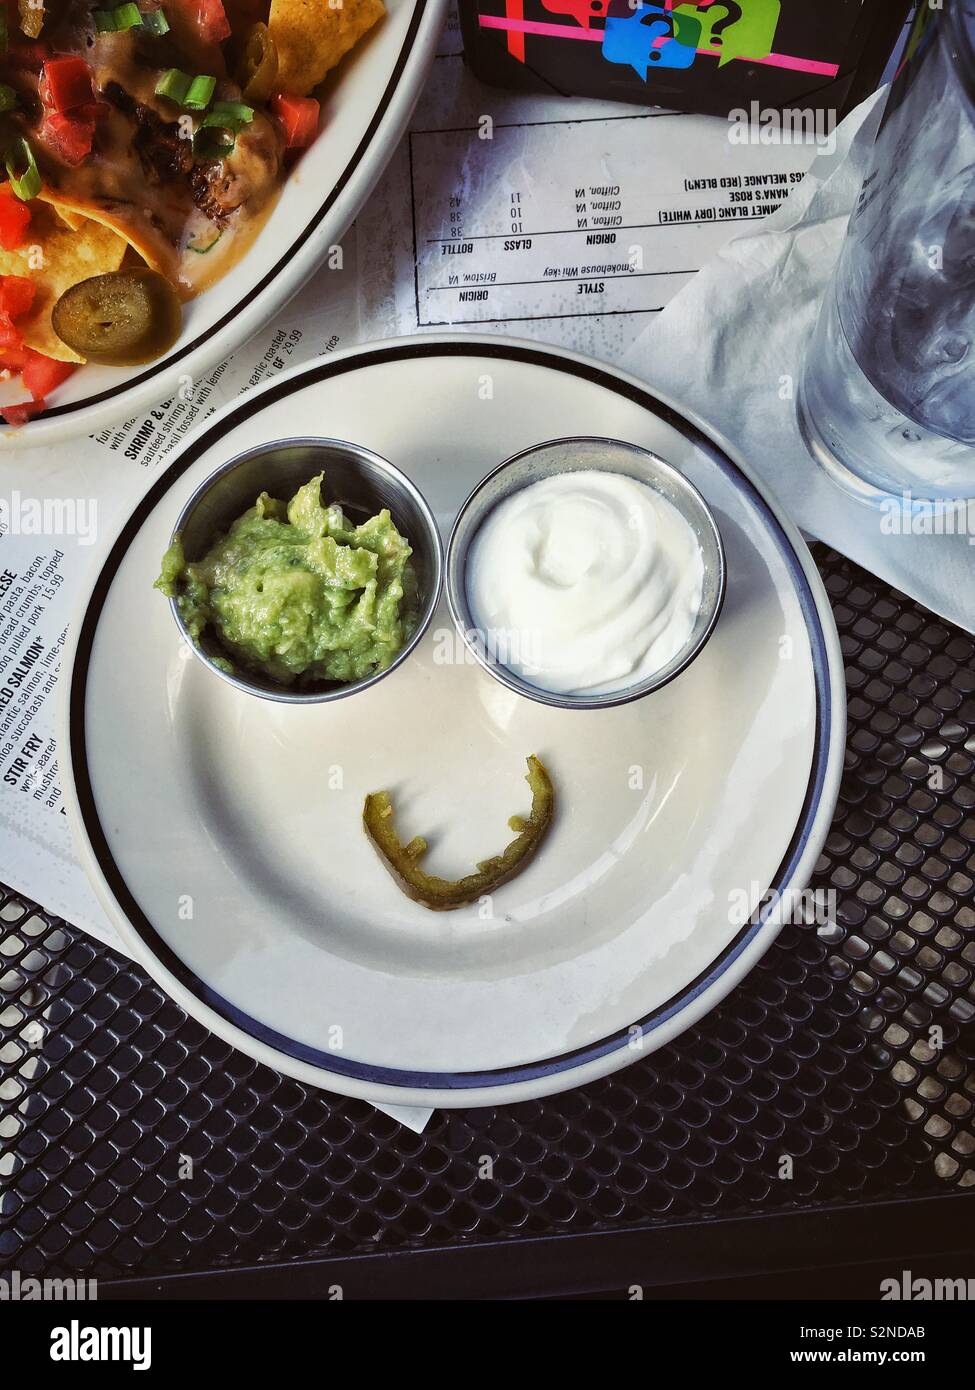 Guacamole and sour cream on a plate with jalapeño. Smiley face emoji. Stock Photo